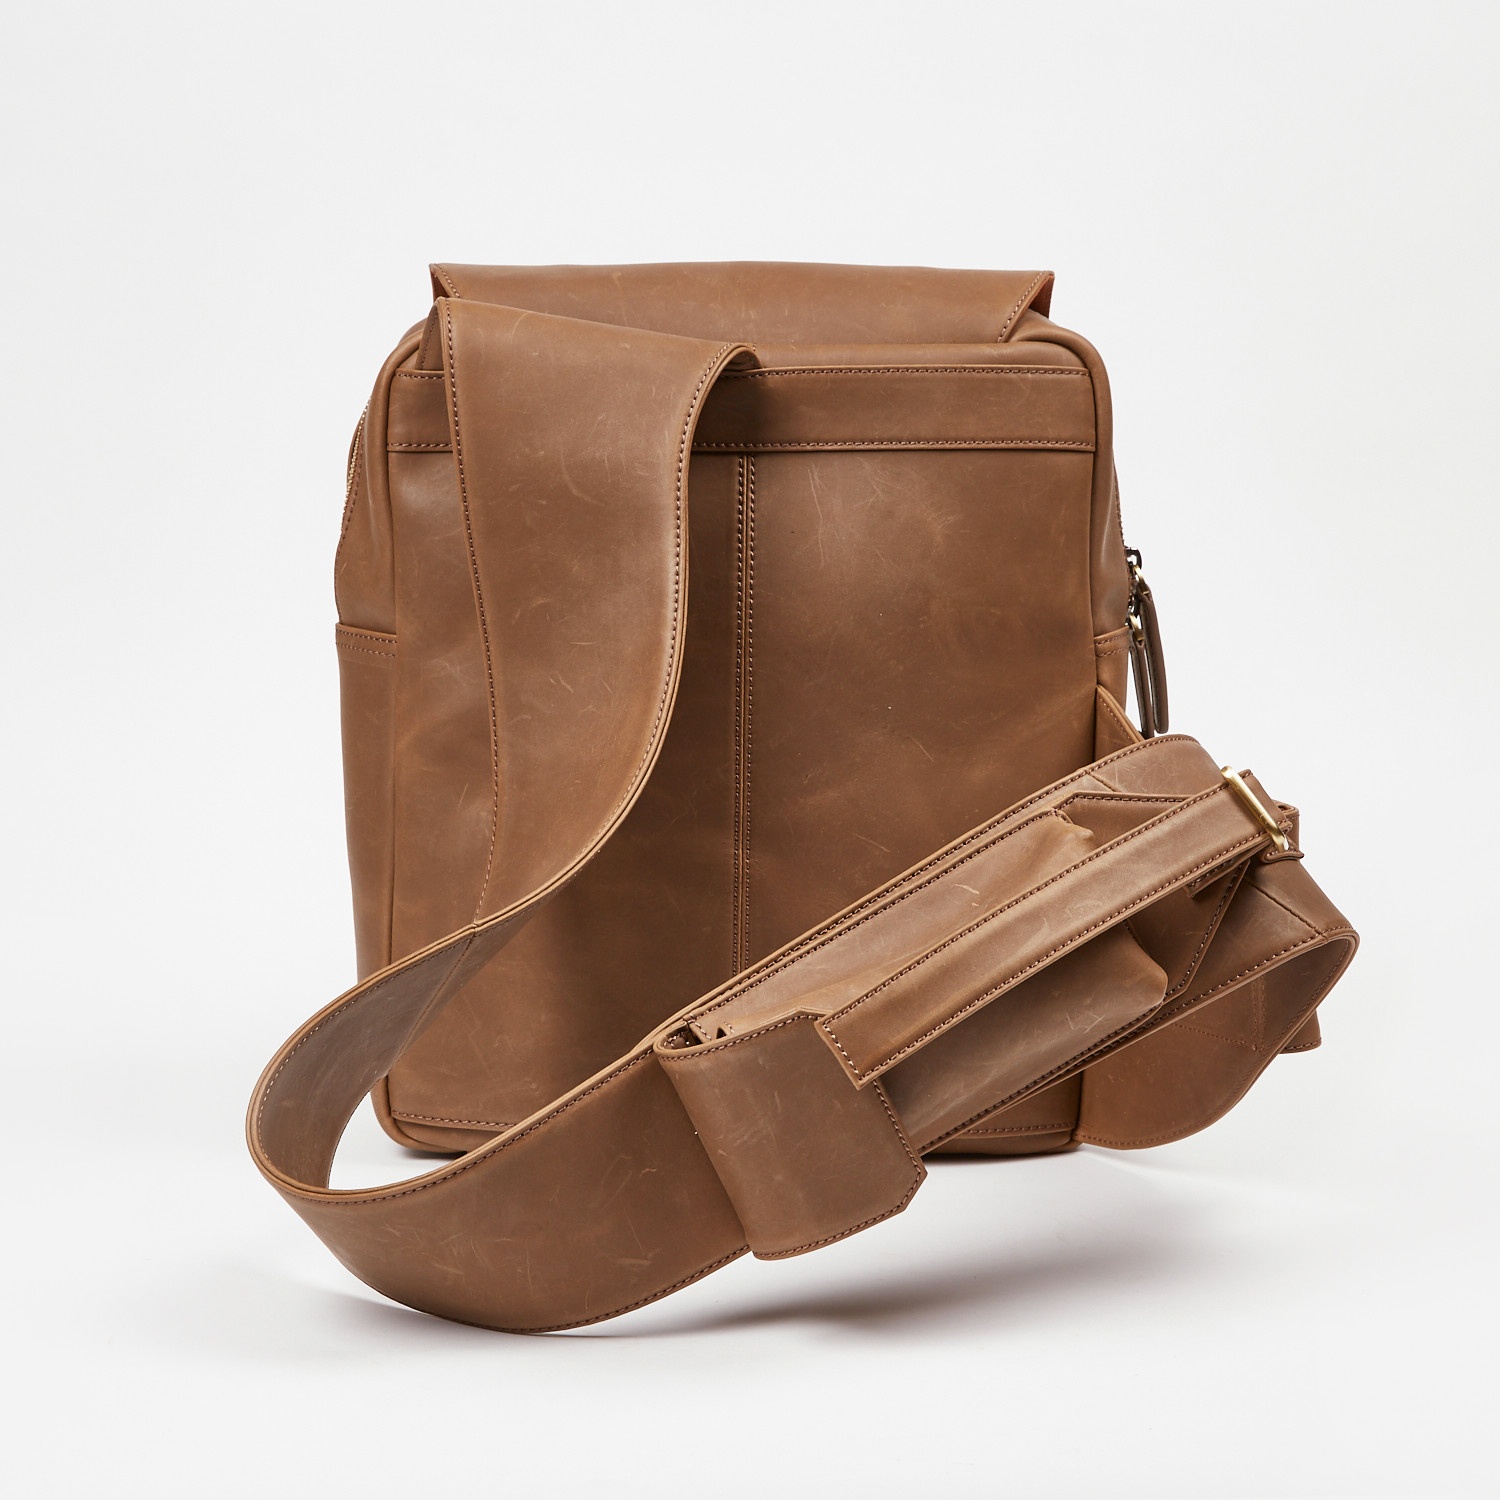 Man-PACK Classic 2.0 // Leather Messenger Bag - Man-Pack - Touch of Modern